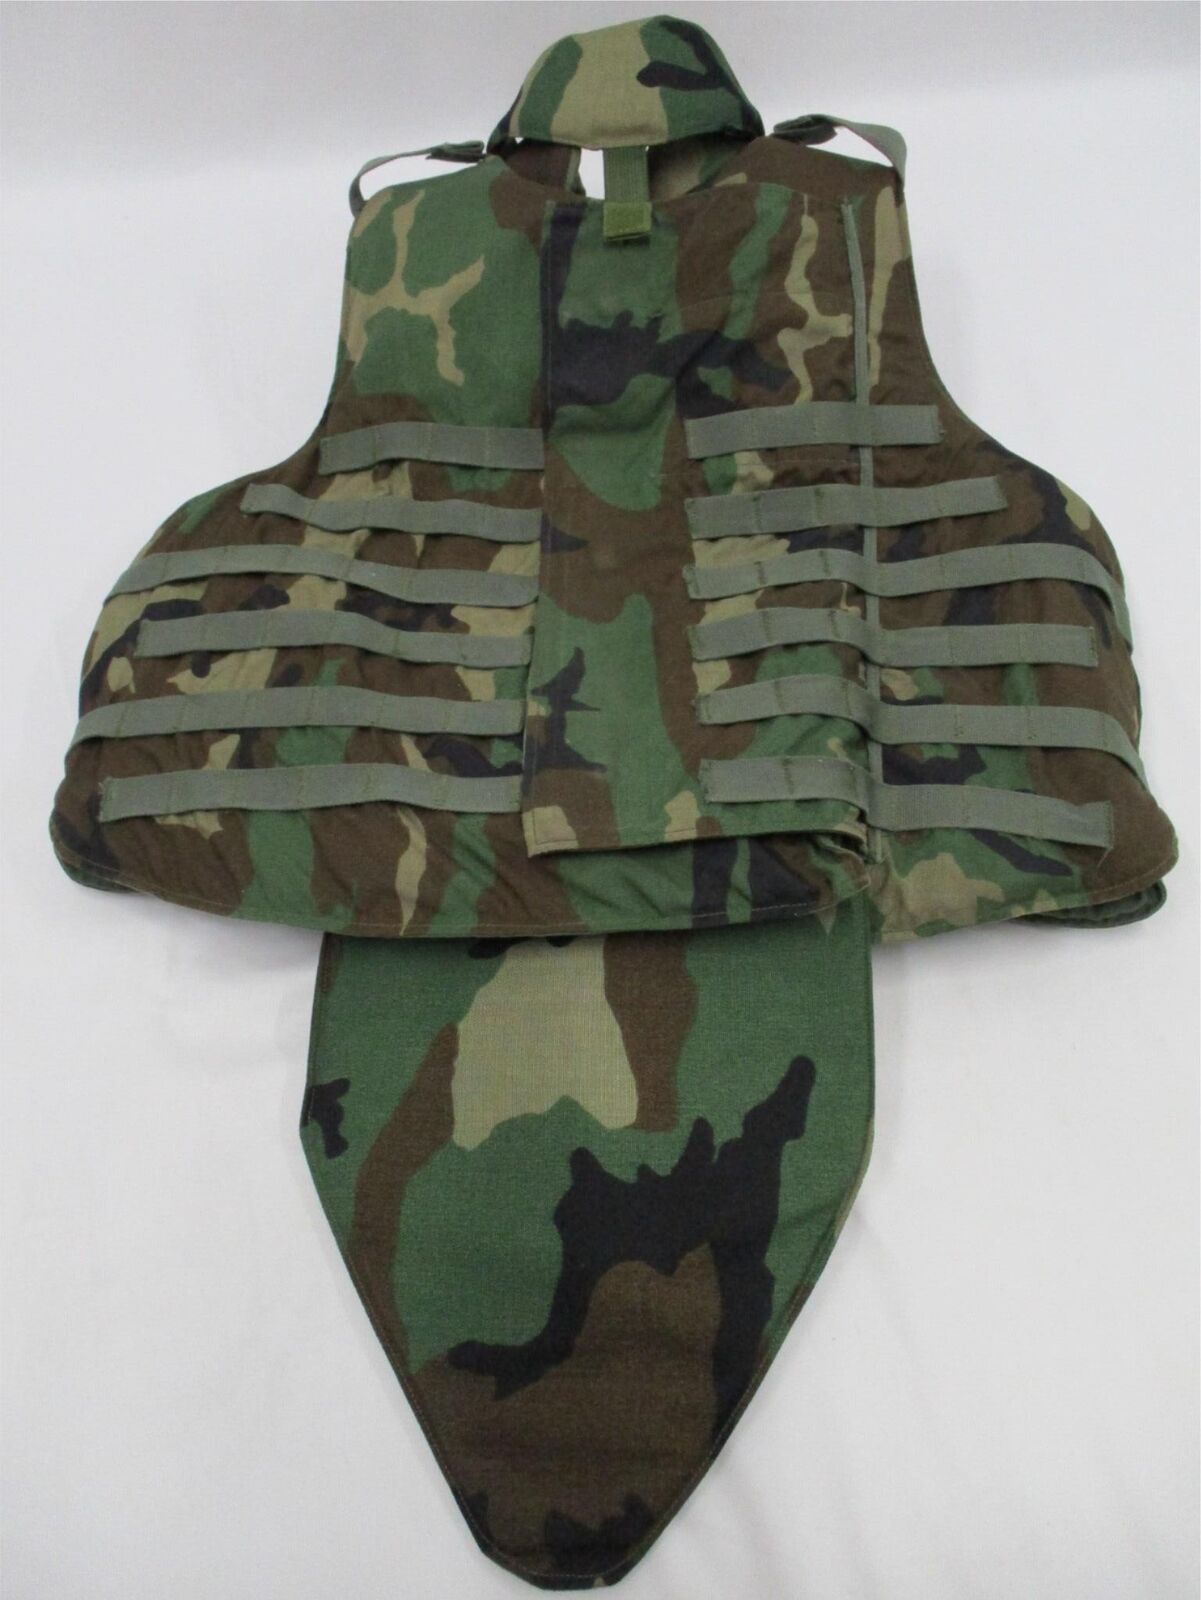 WOODLAND CAMOUFLAGE BODY ARMOR PLATE CARRIER BDU MADE W/KEVLAR INSERTS LGE VEST